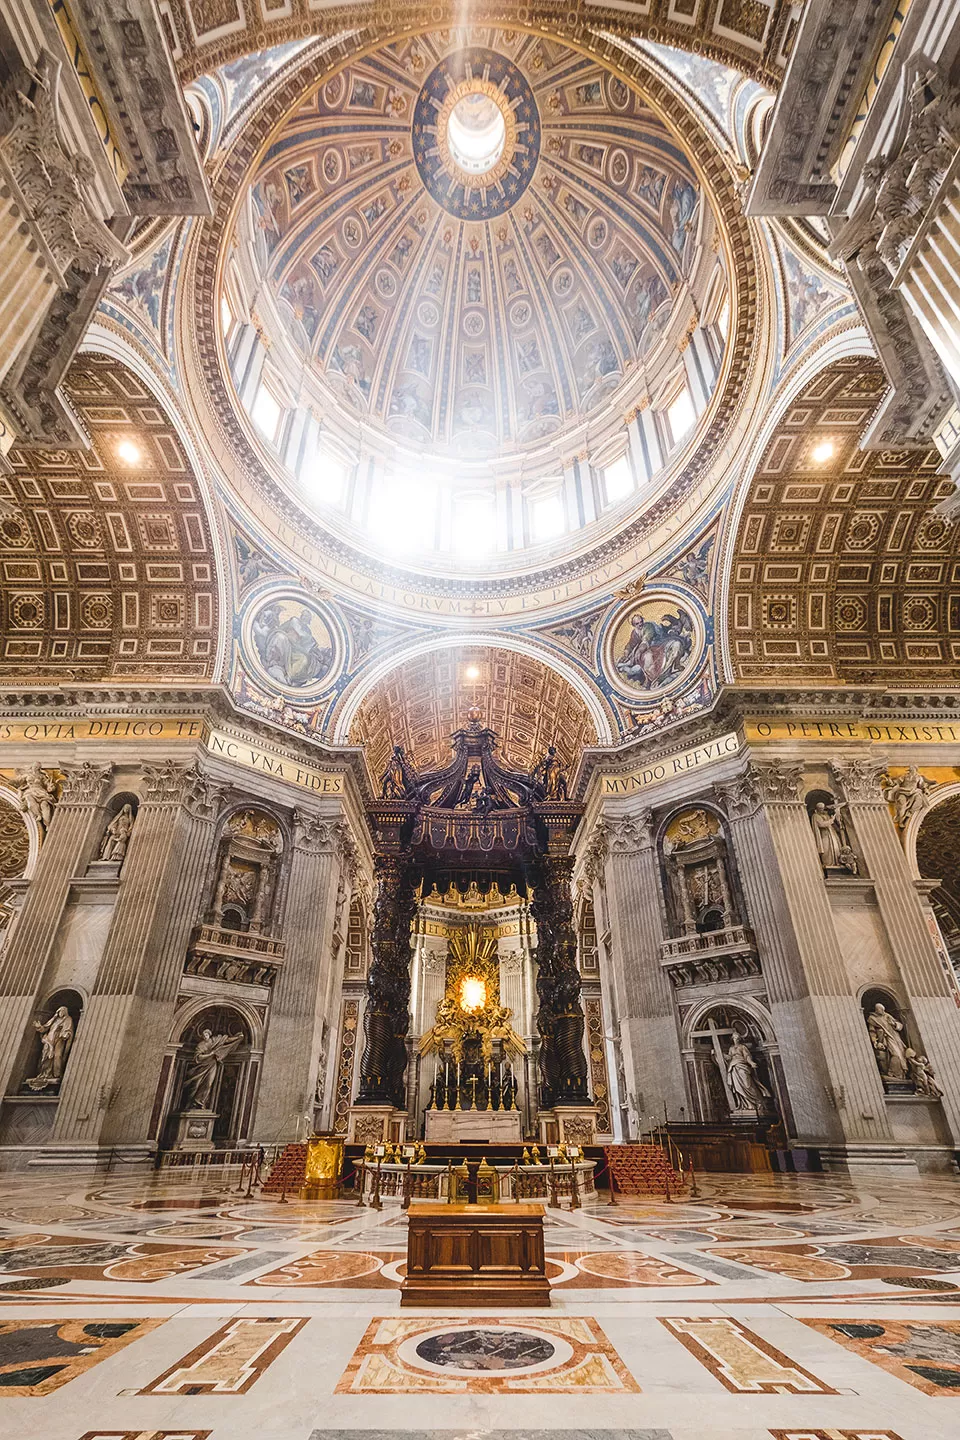 Rome 3 Day Itinerary - Things to do in Rome in 3 days - Inside St Peter's Basilica in Vatican City the biggest cathedral in the world